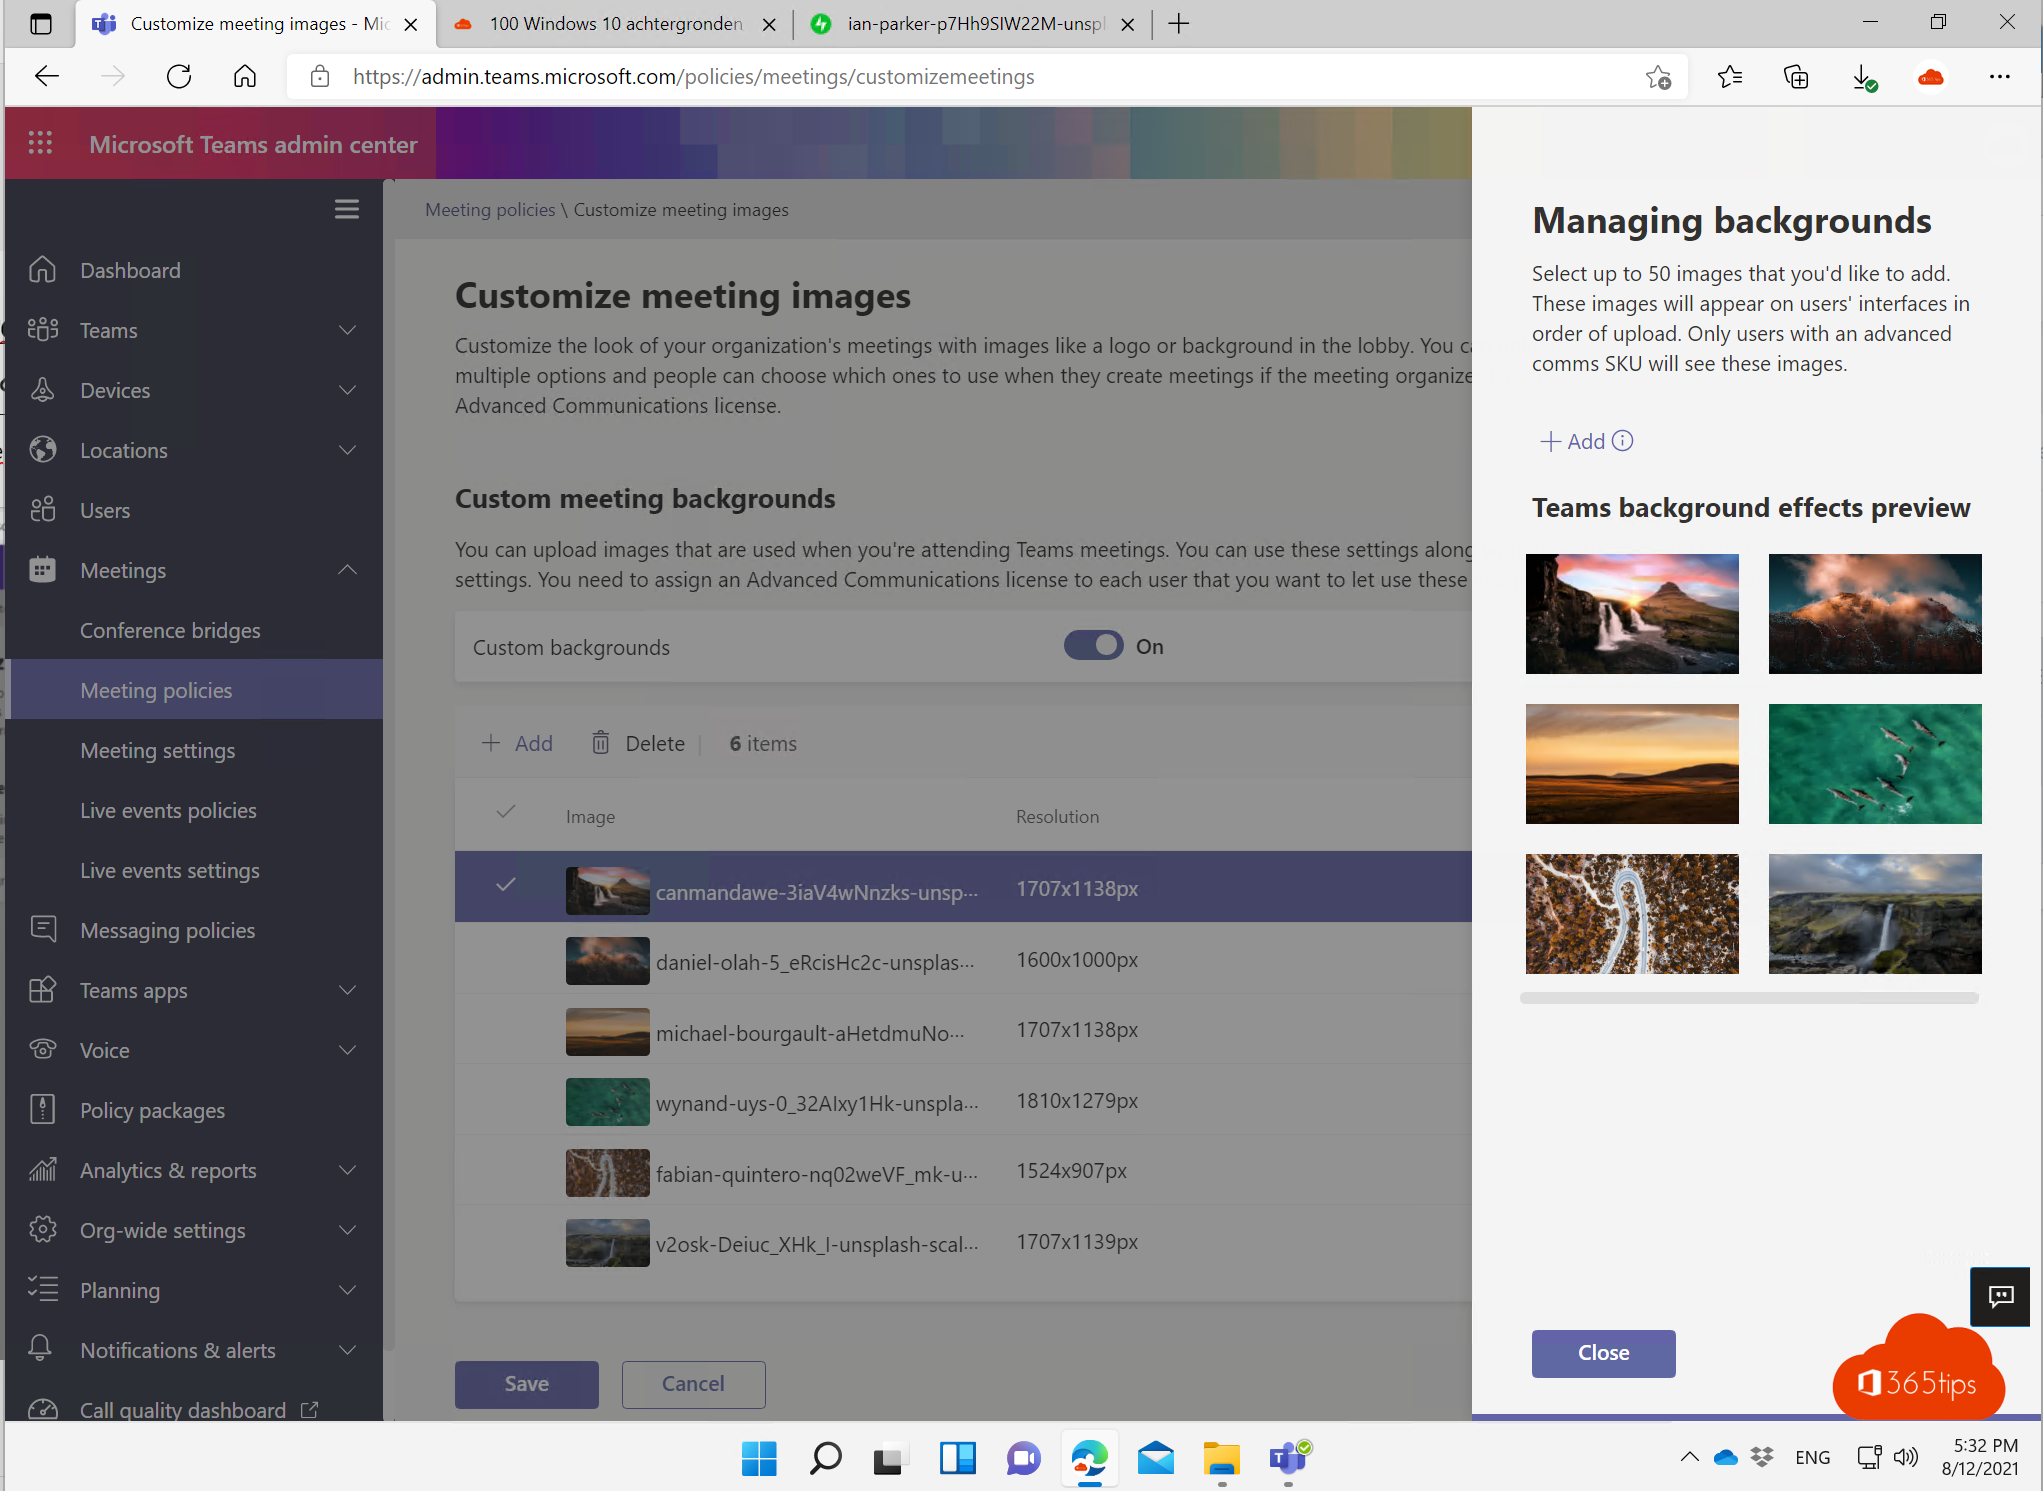 How to configure organisation-wide backgrounds in Microsoft Teams?